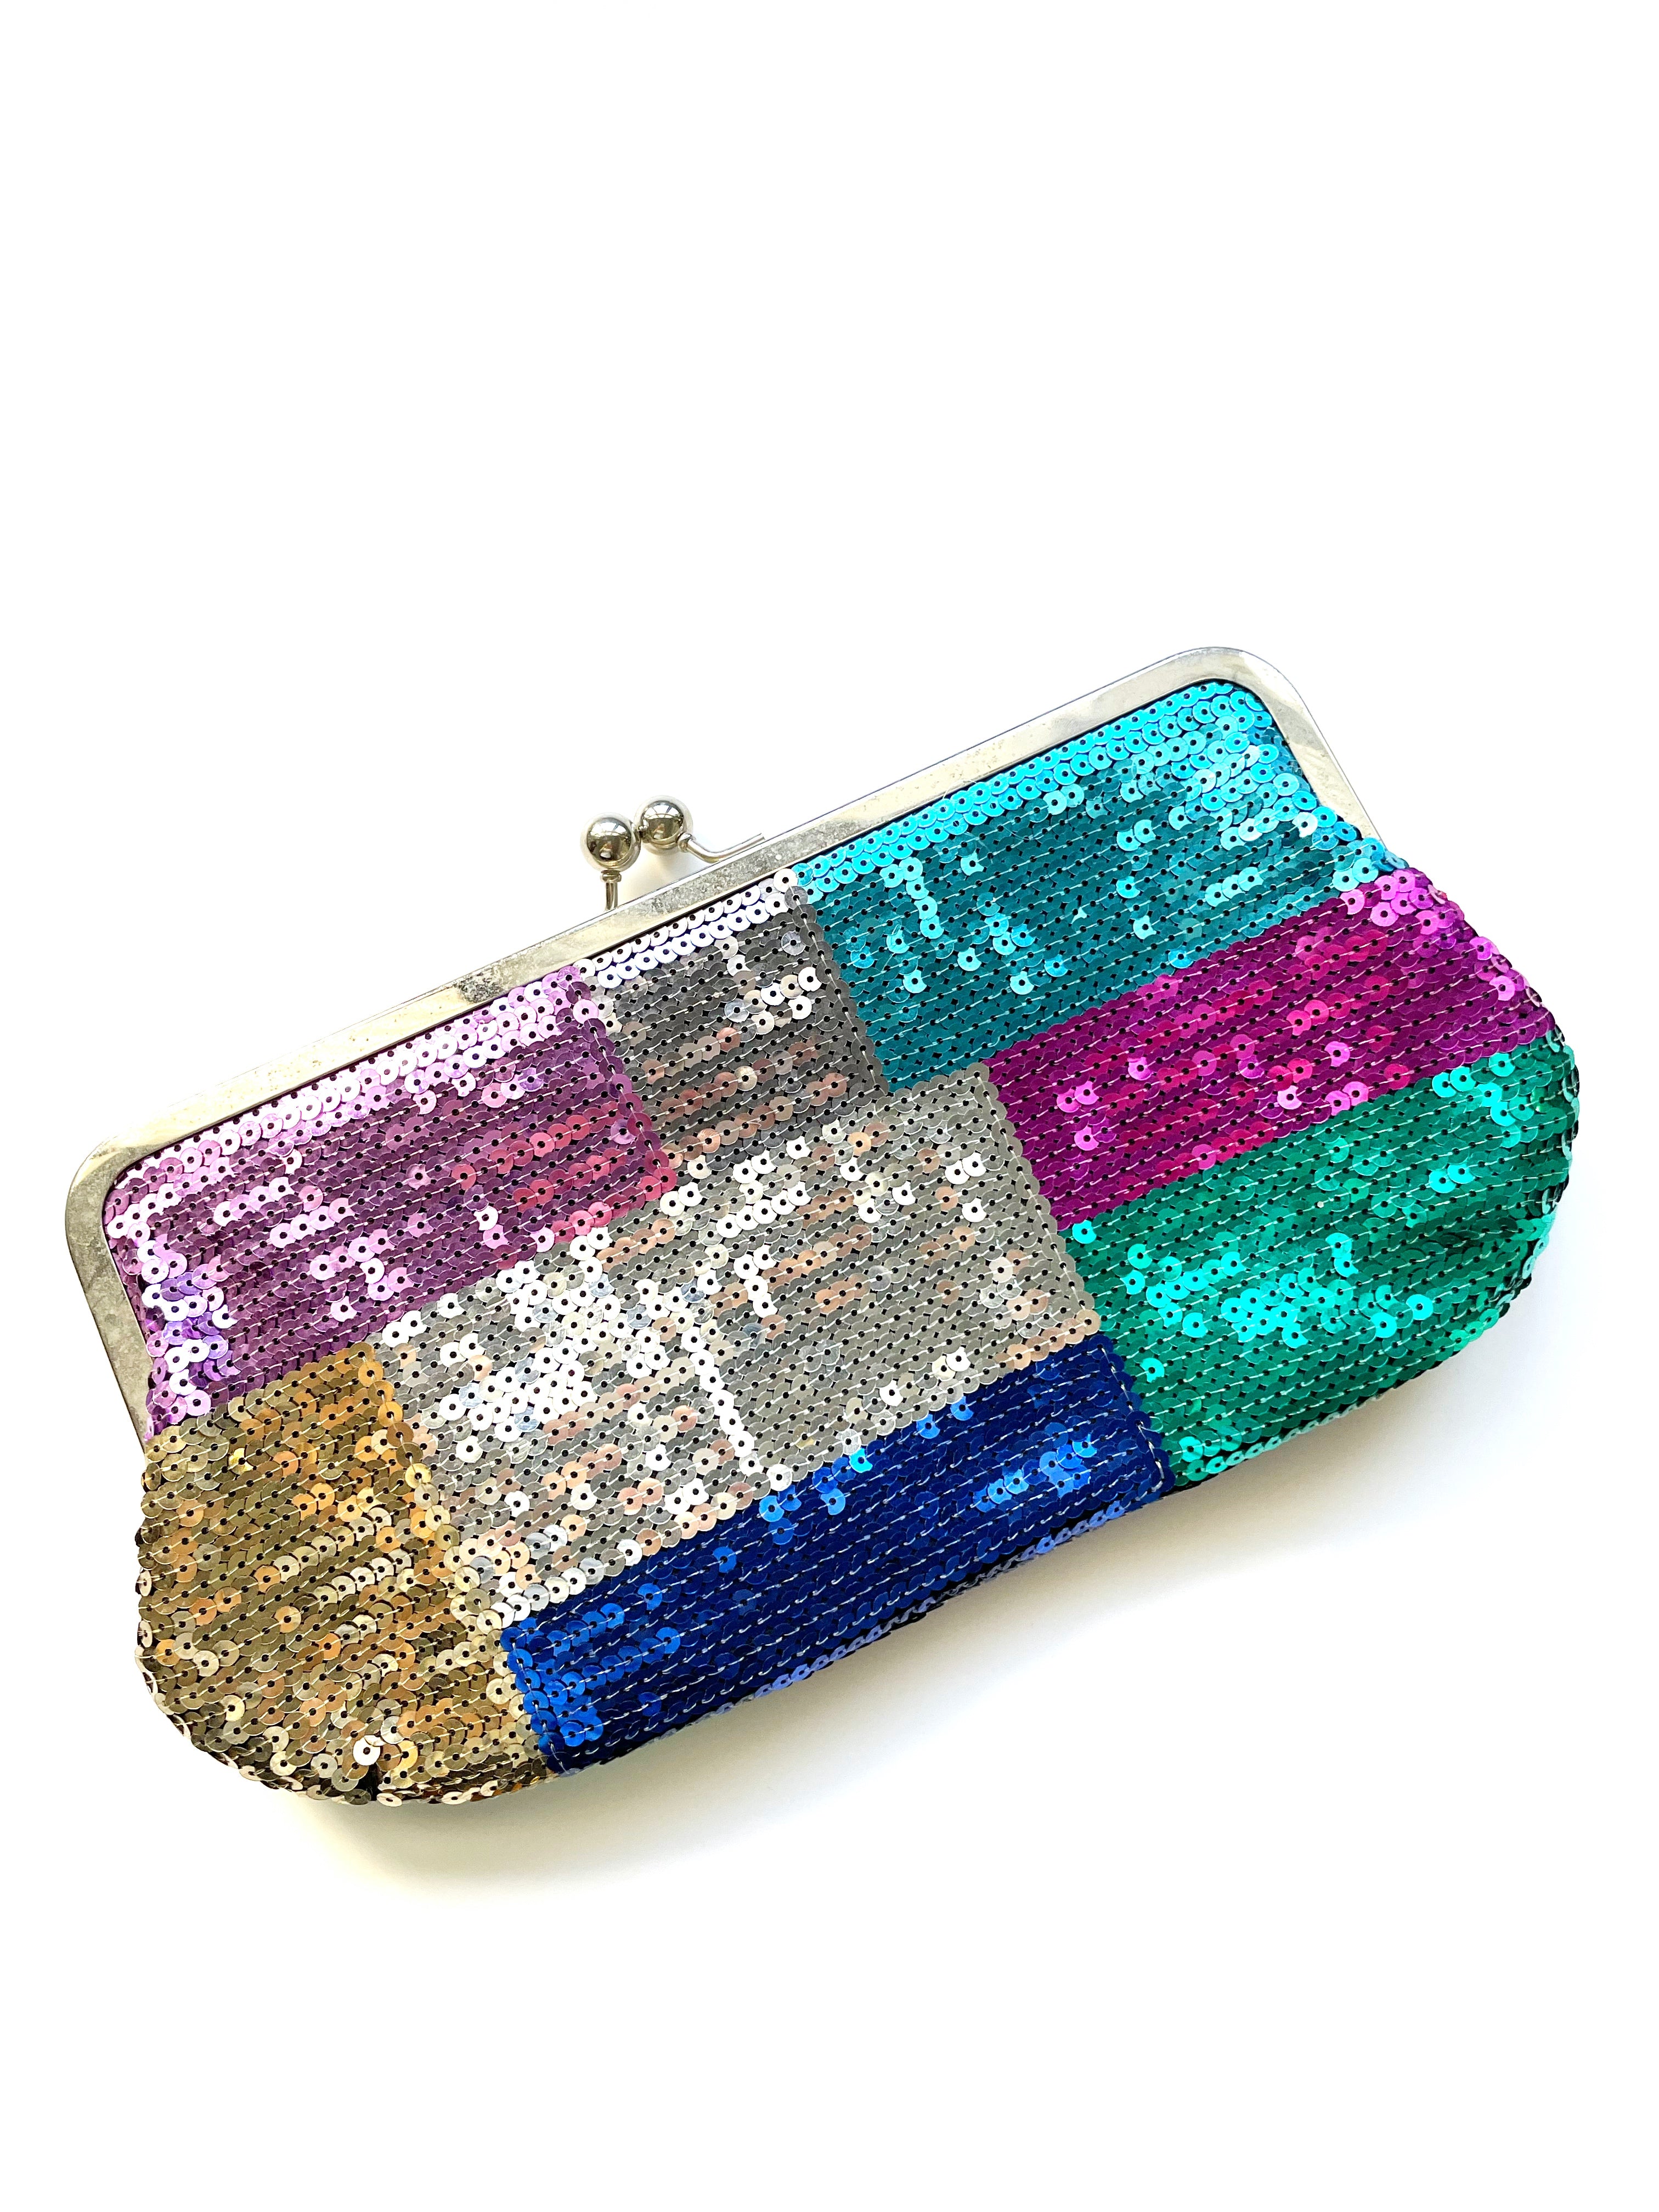 Pre-Loved Clutch